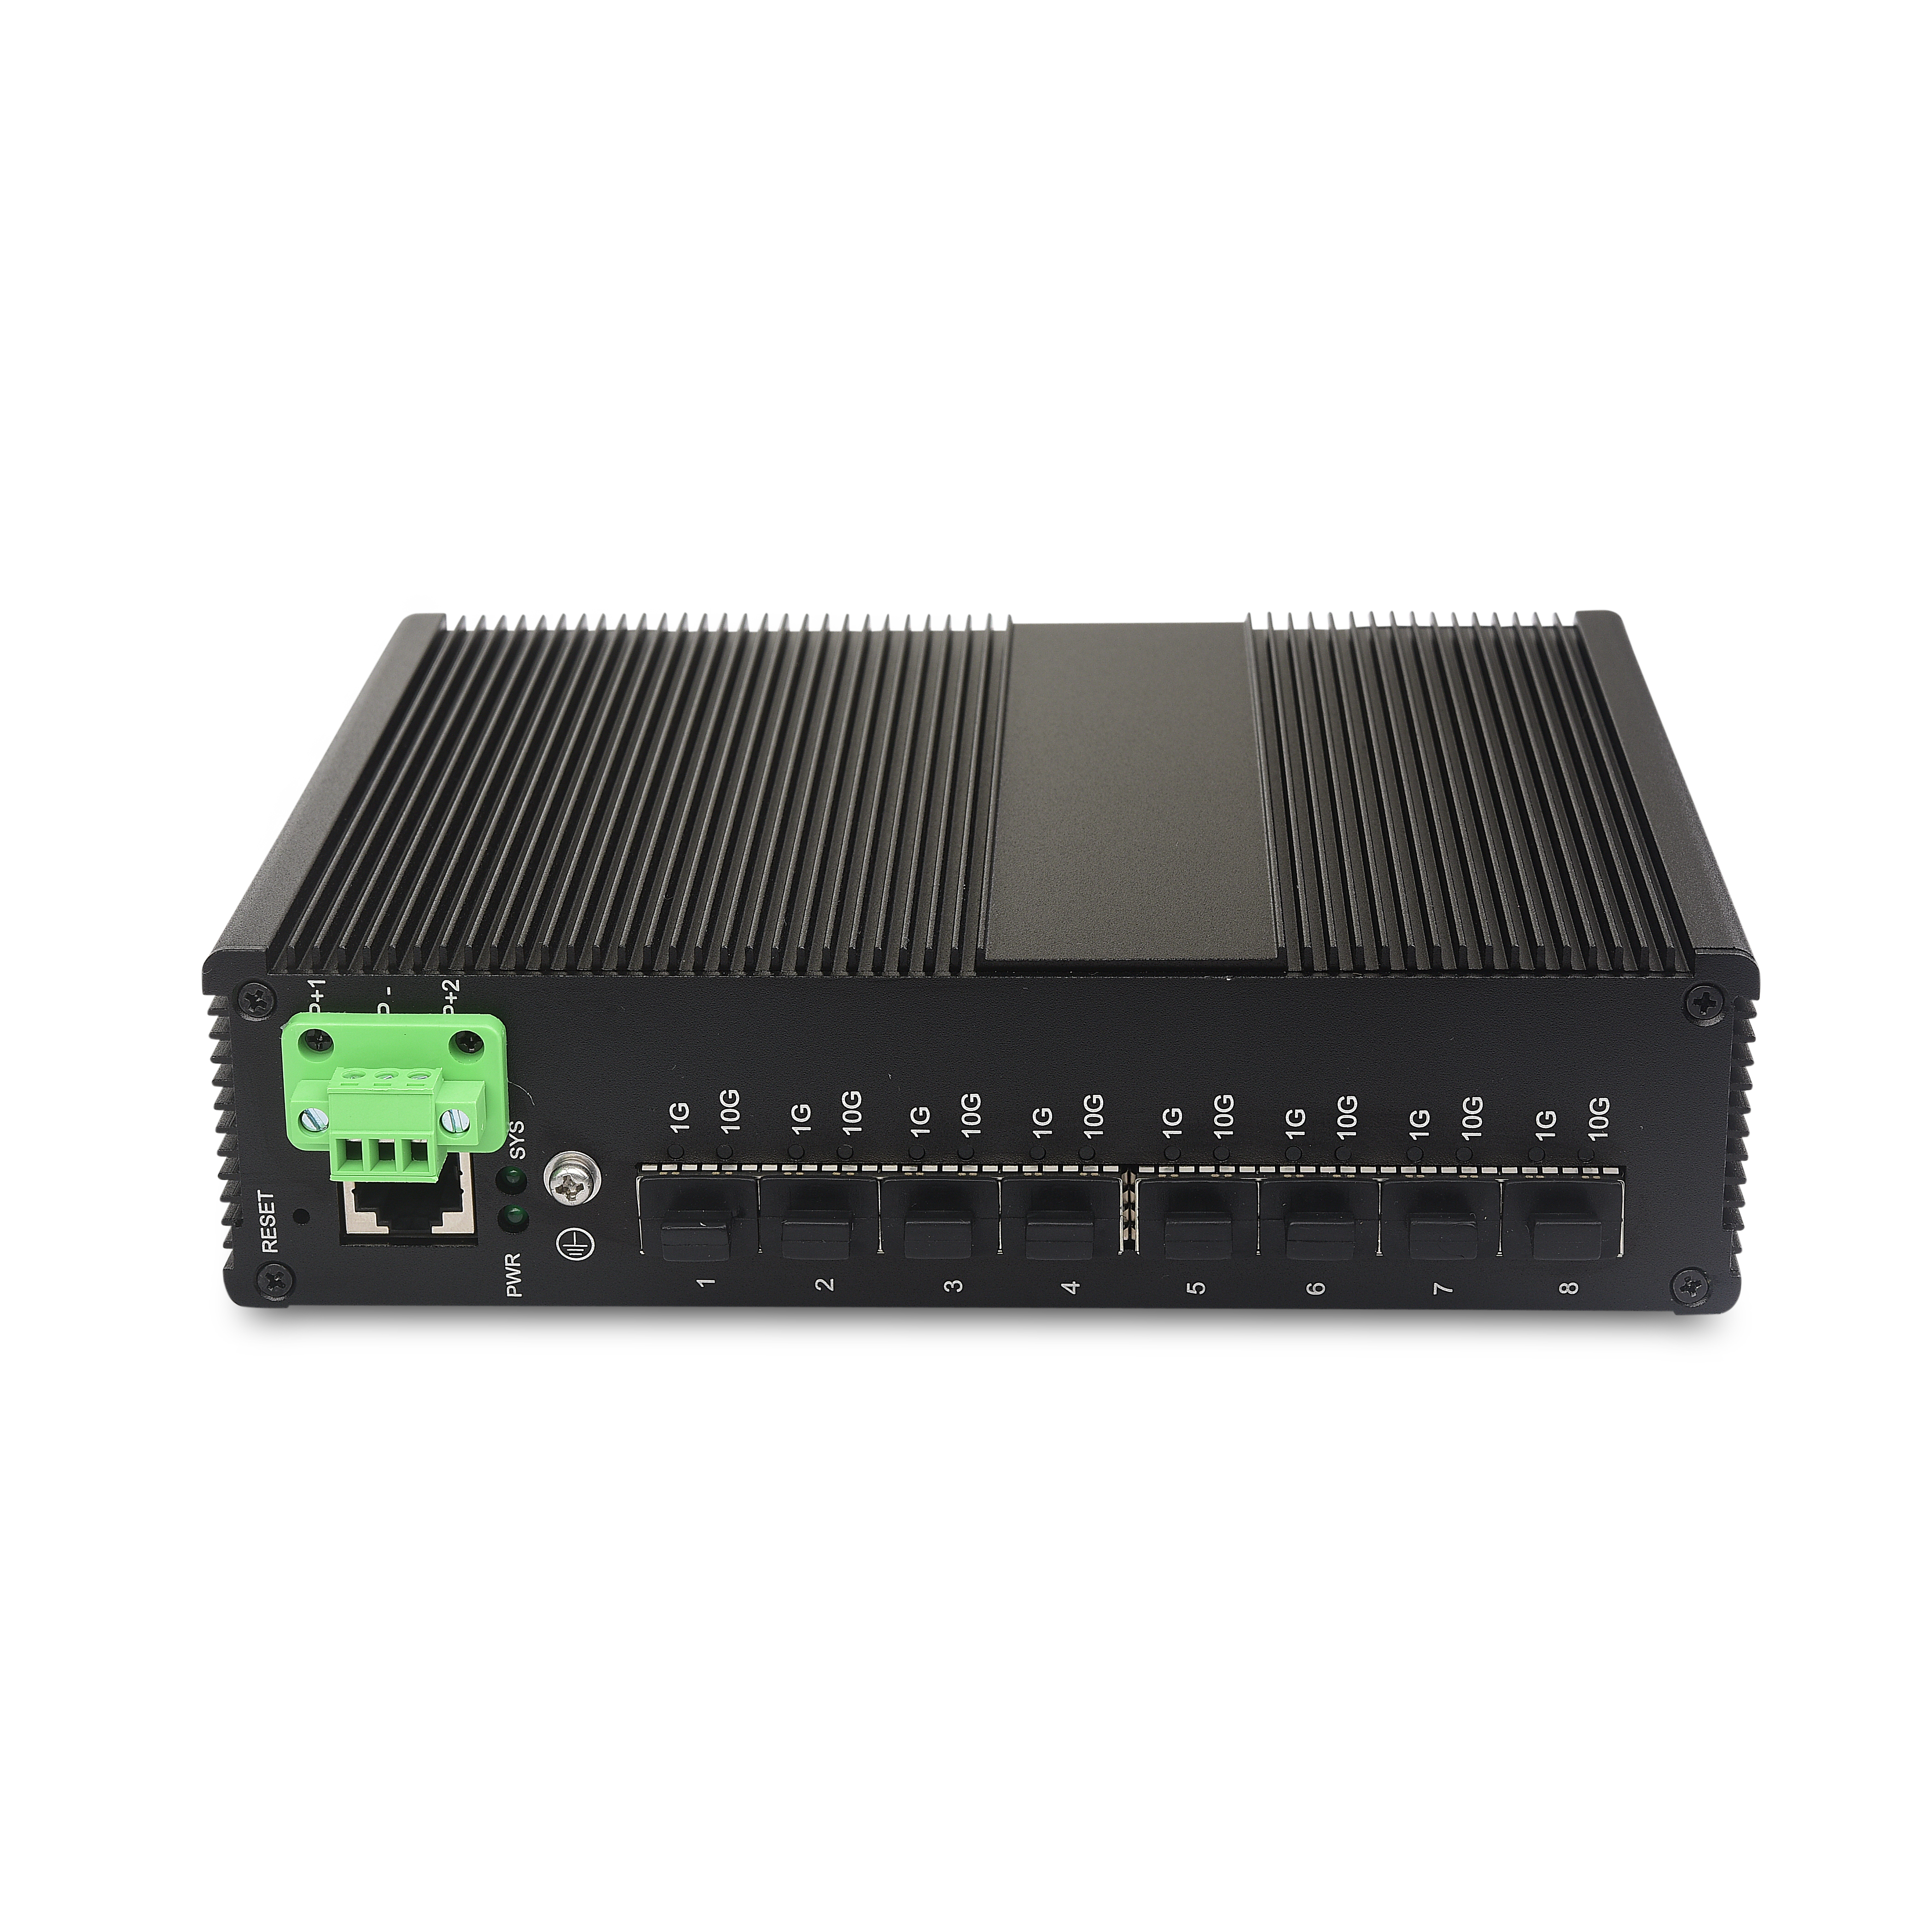 Introducing Our New Industrial Ethernet Switch -JHA-MIW8SH- The Perfect Connectivity Solution